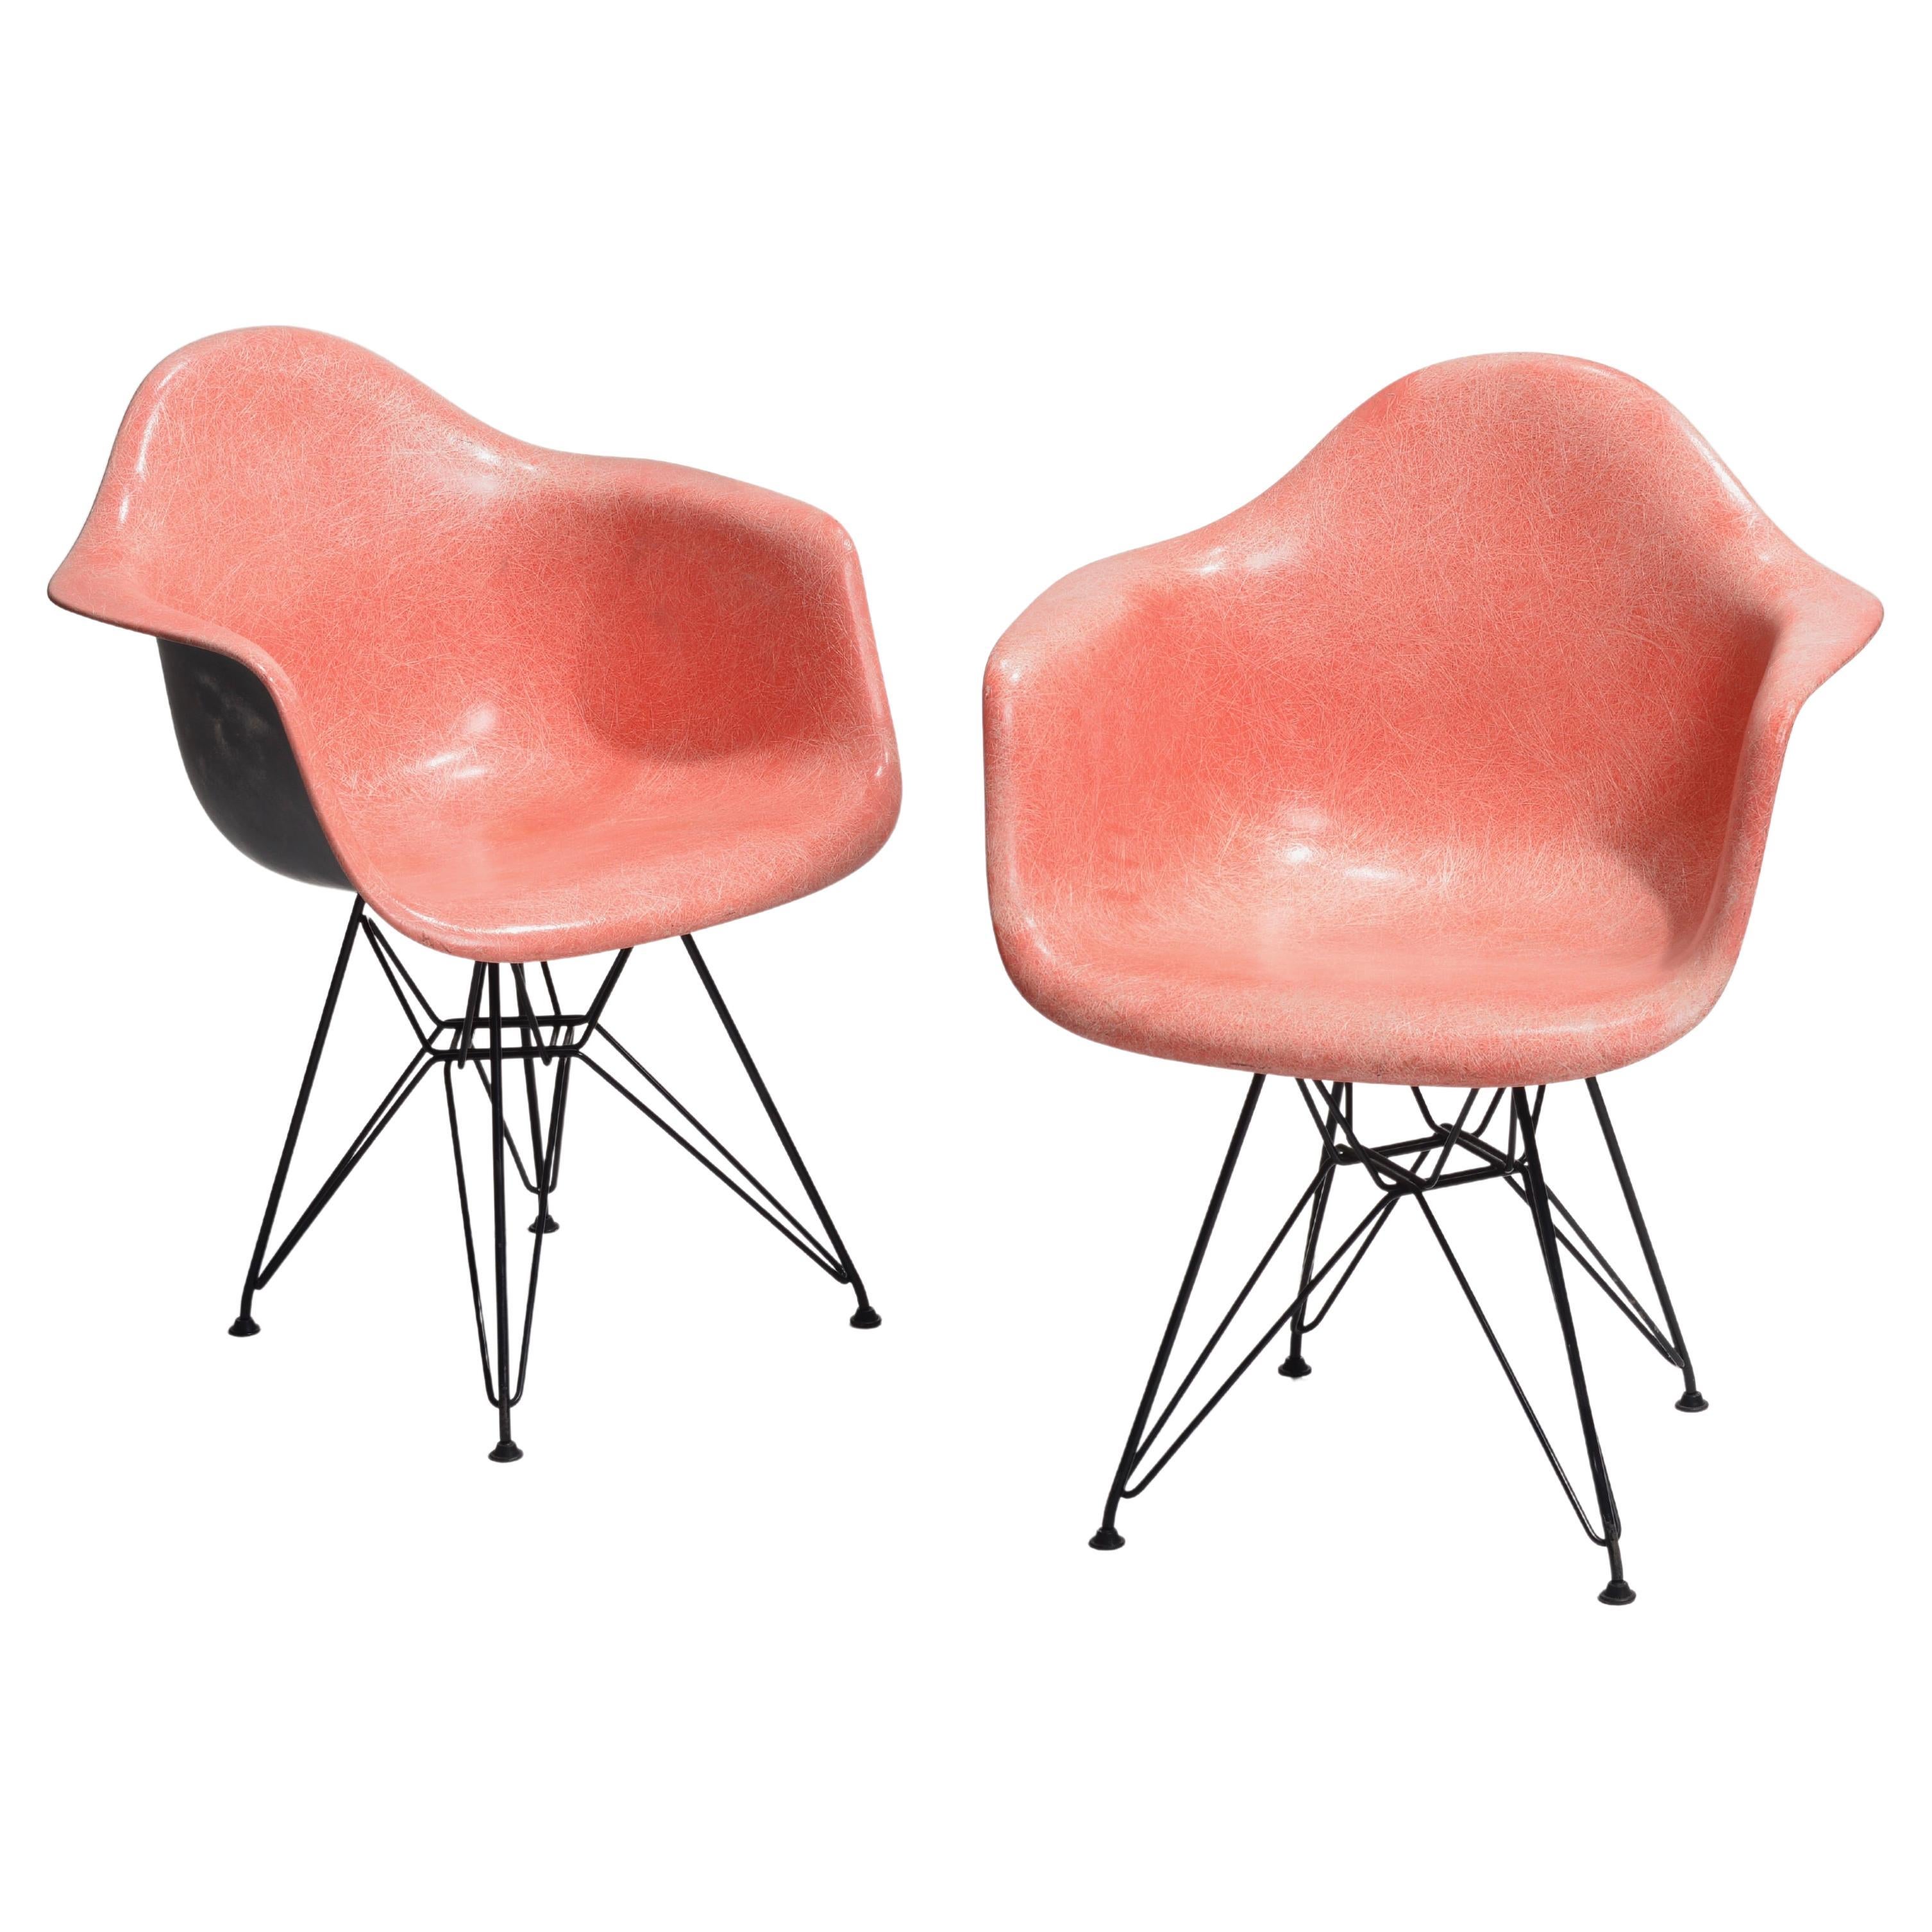 Zenith Charles Eames DAR Fiberglass Shell Chairs For Sale